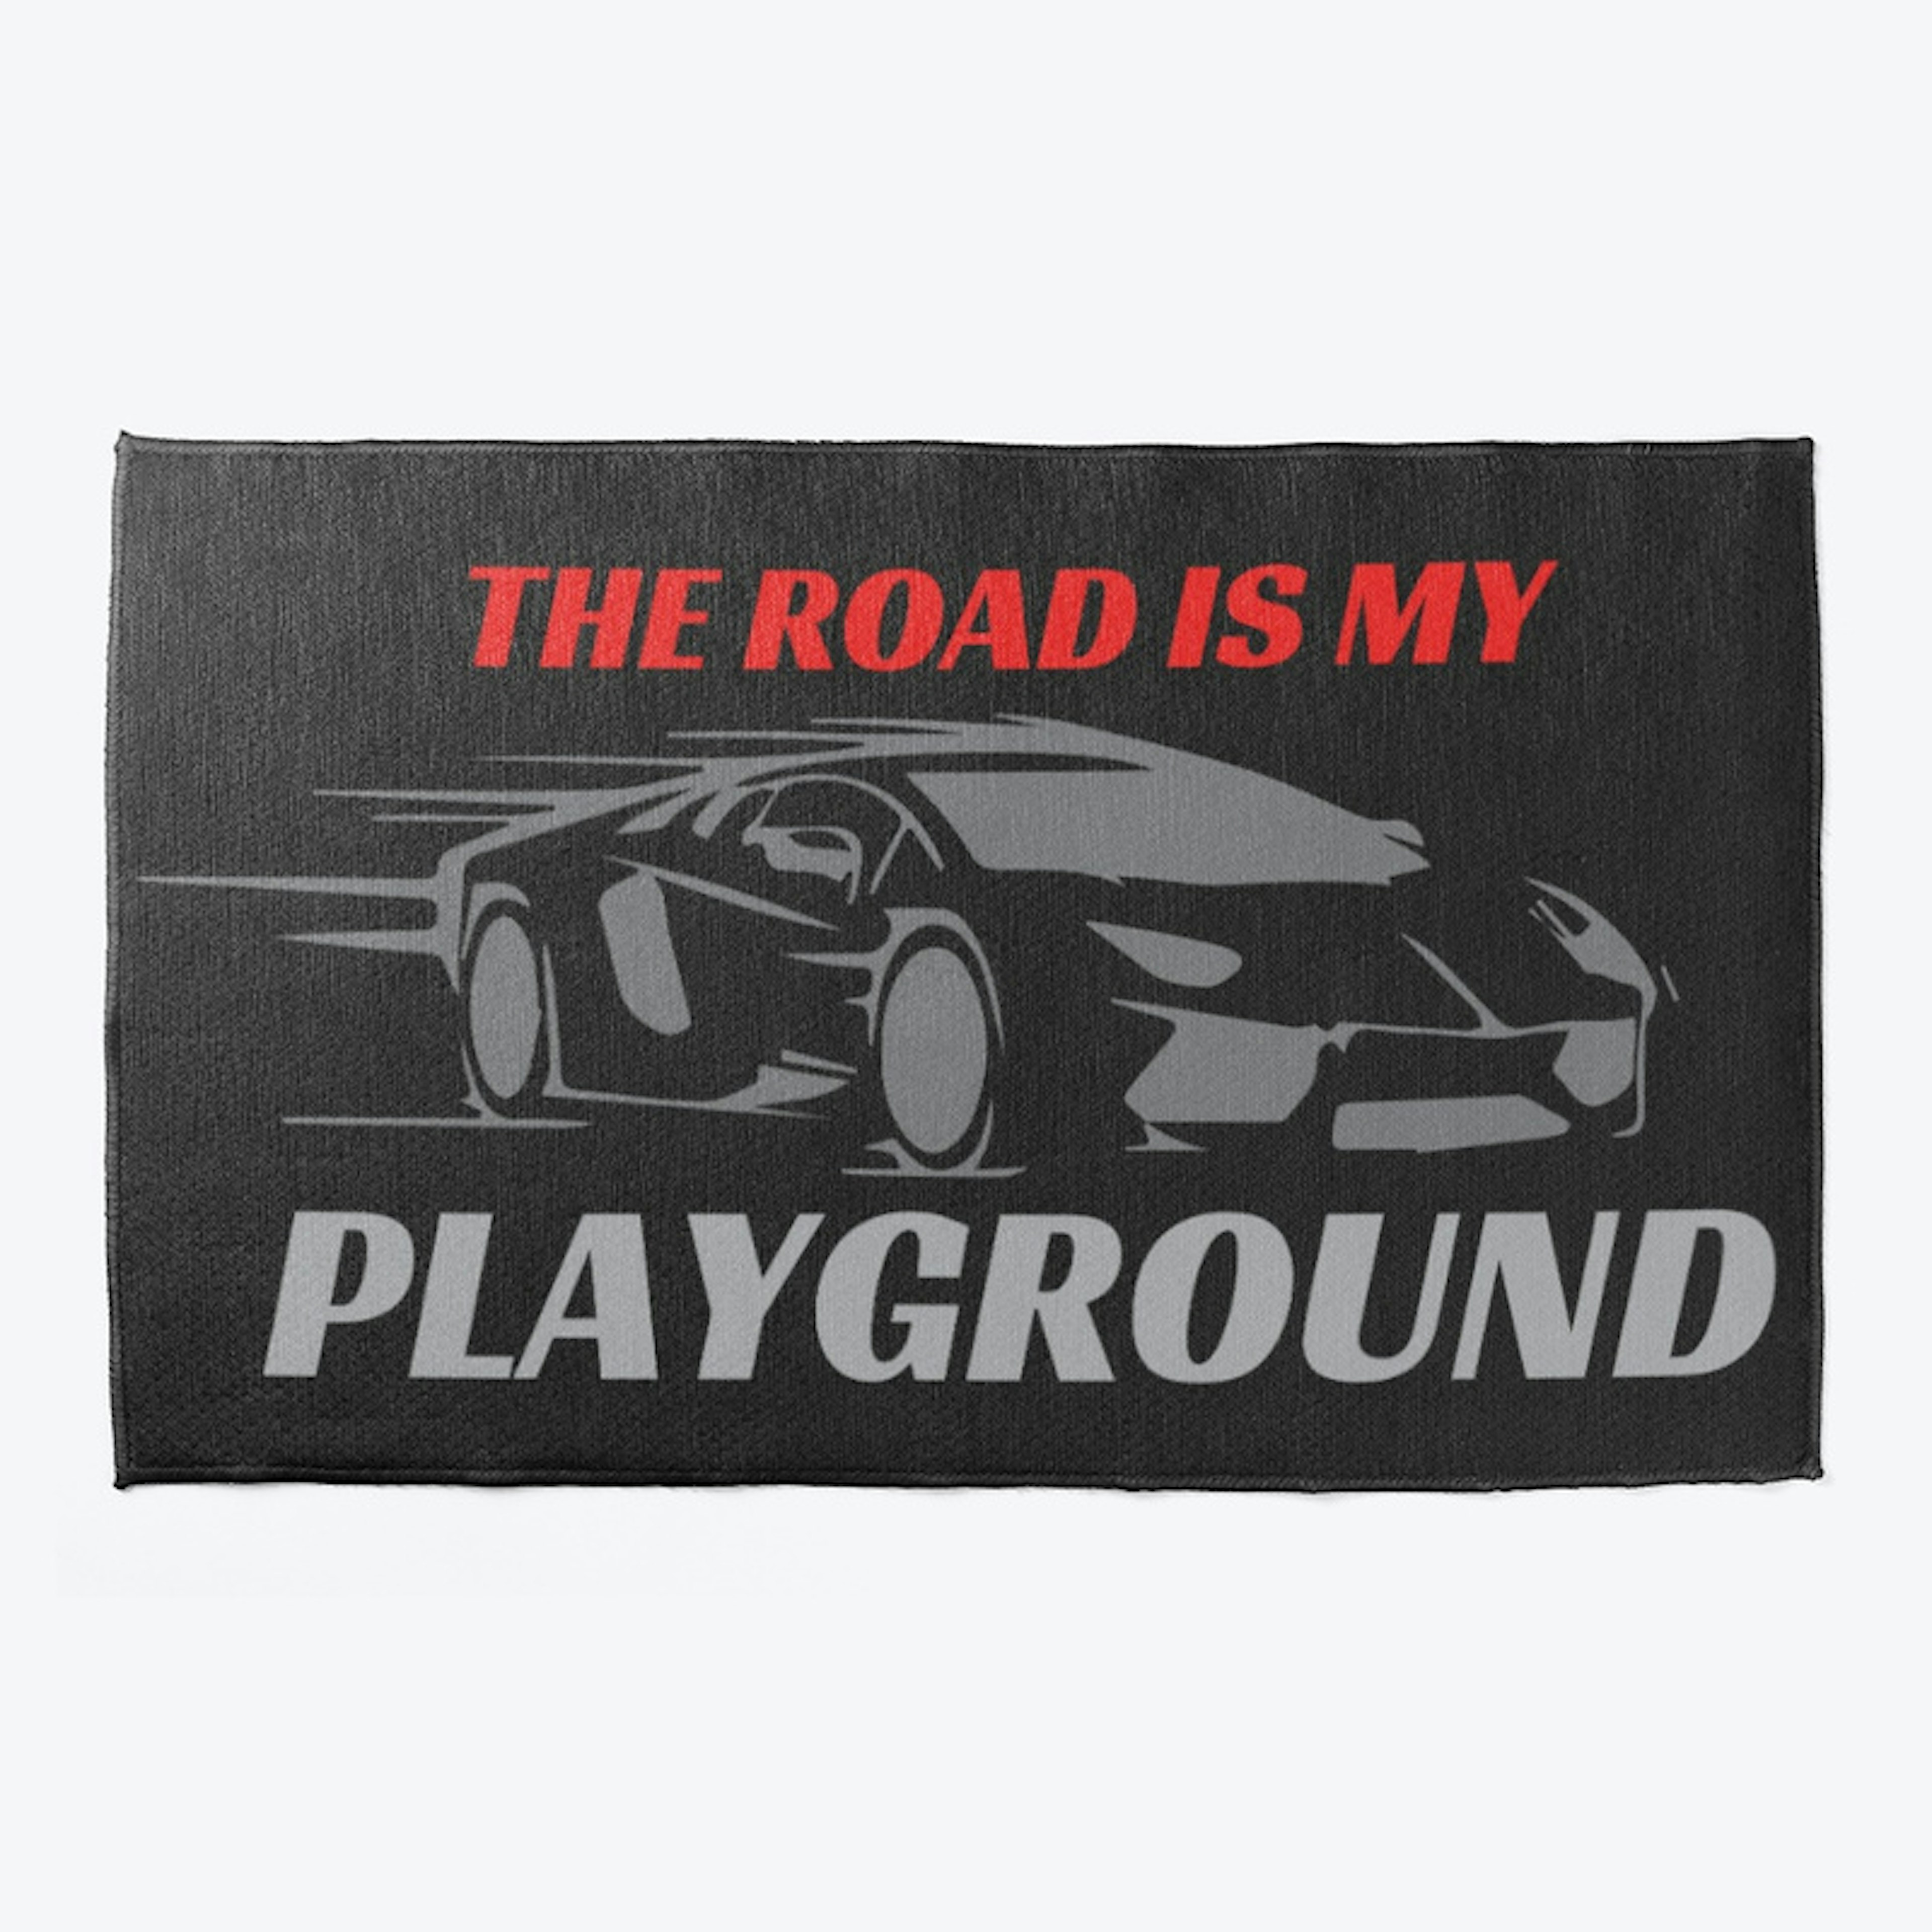 The road is my playground